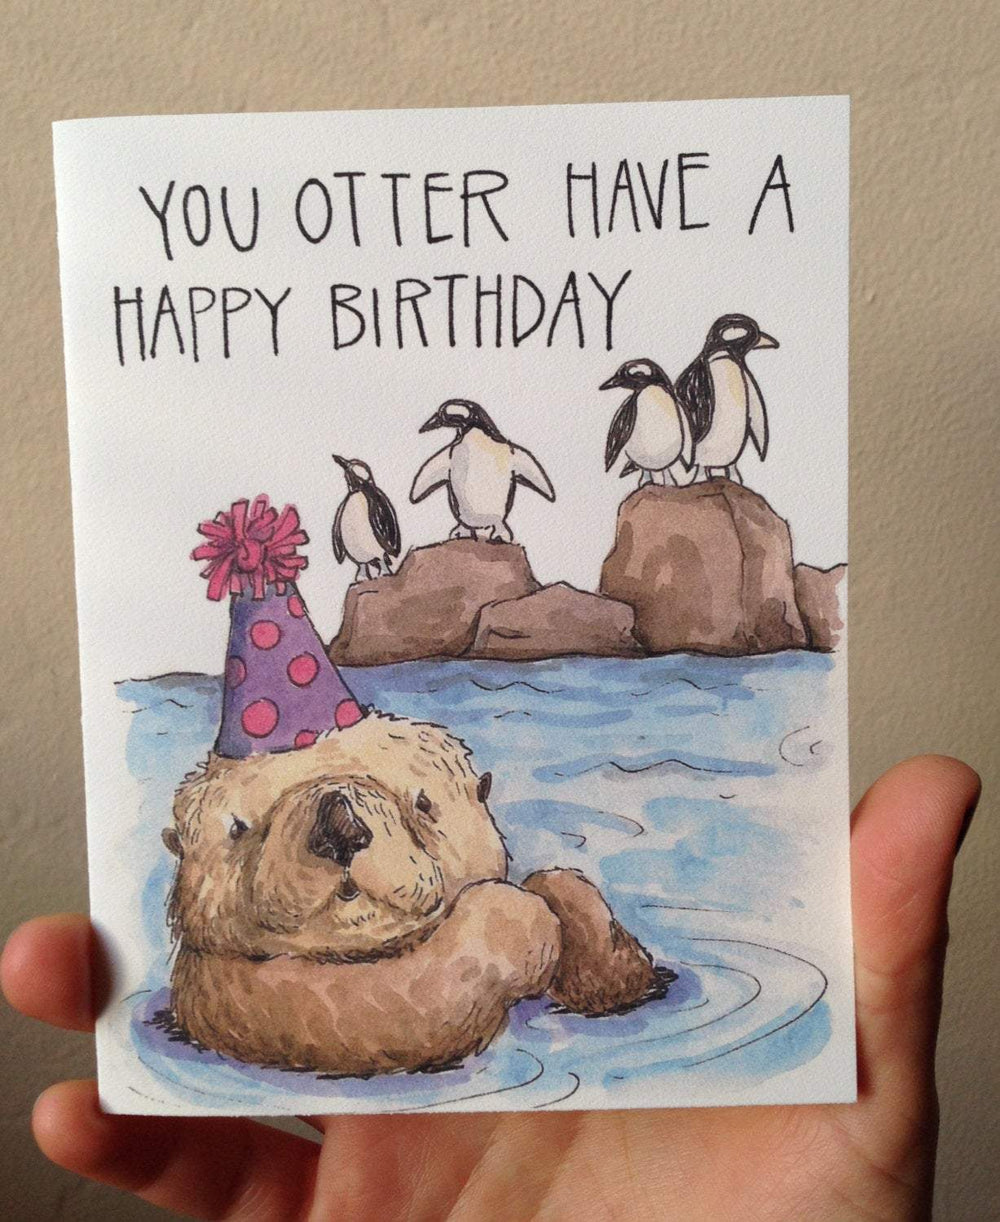 Paper Wilderness Single Card You Otter Have A Happy Birthday Card